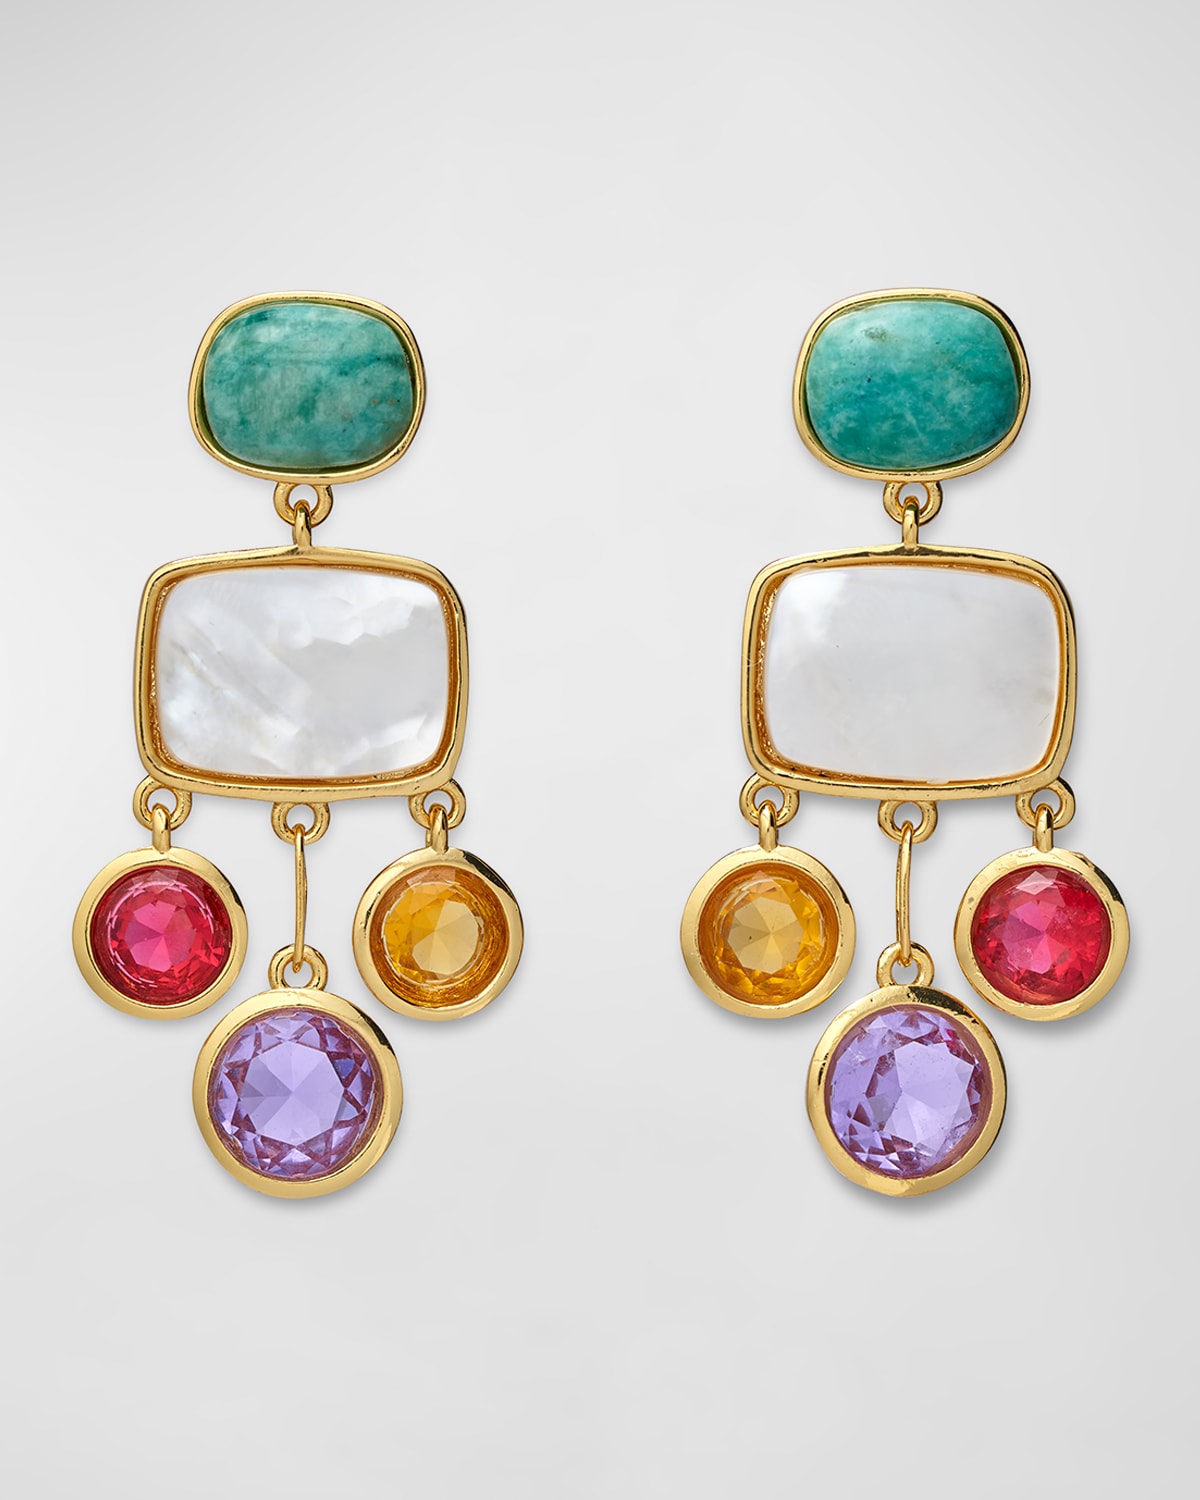 Lizzie Fortunato Parade 24K Gold Plated Multi-Stone Chandelier Drop Earrings in Amazonite, Mother-of-Pearl, Pink Topaz, and Cubic Zirconia